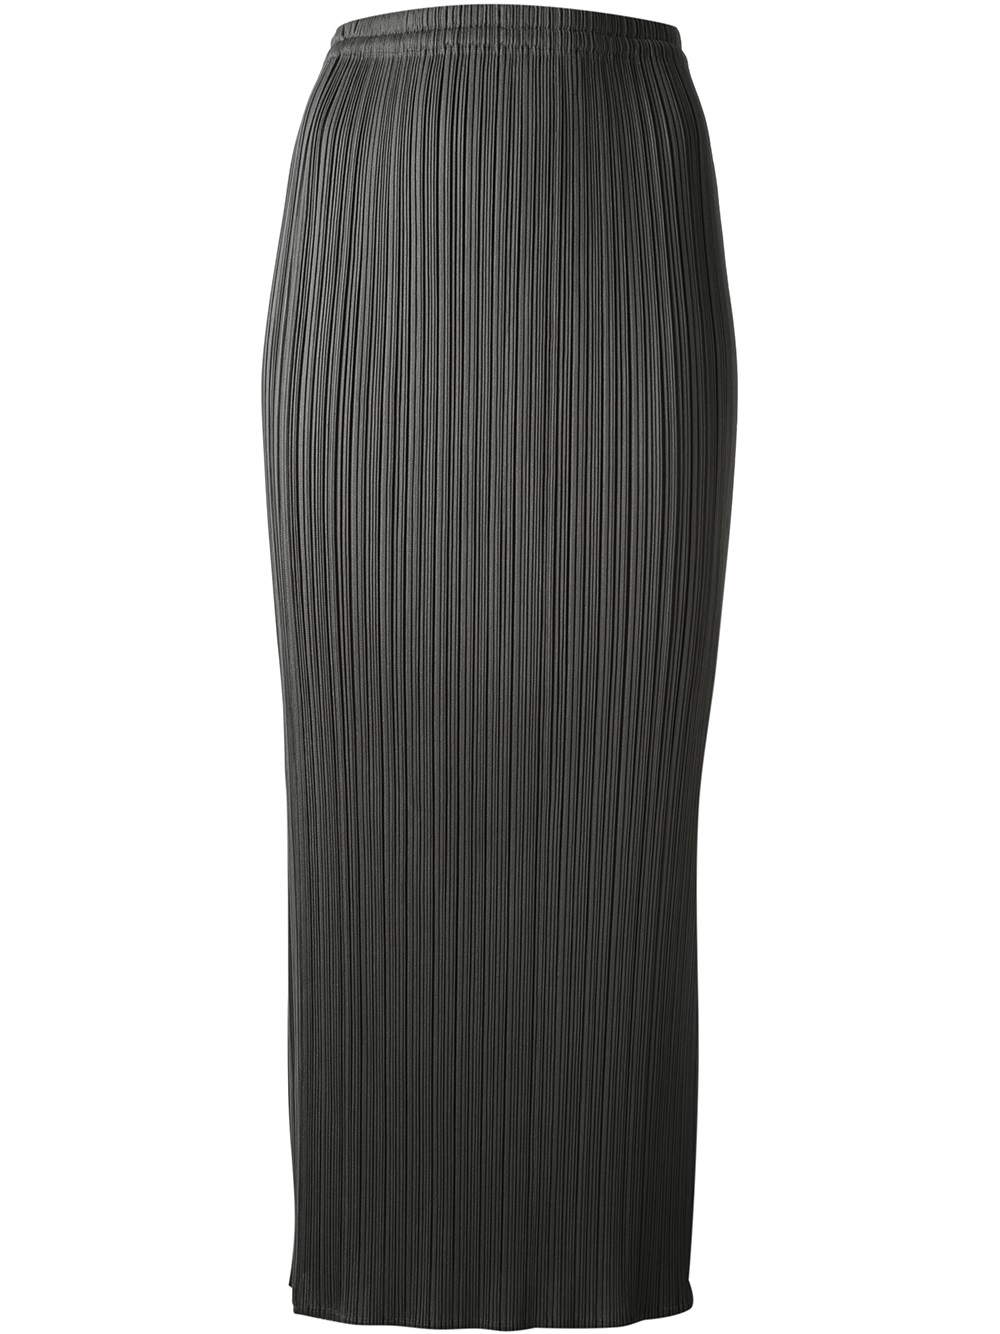 Pleats Please Issey Miyake Pleated Skirt in Gray - Lyst